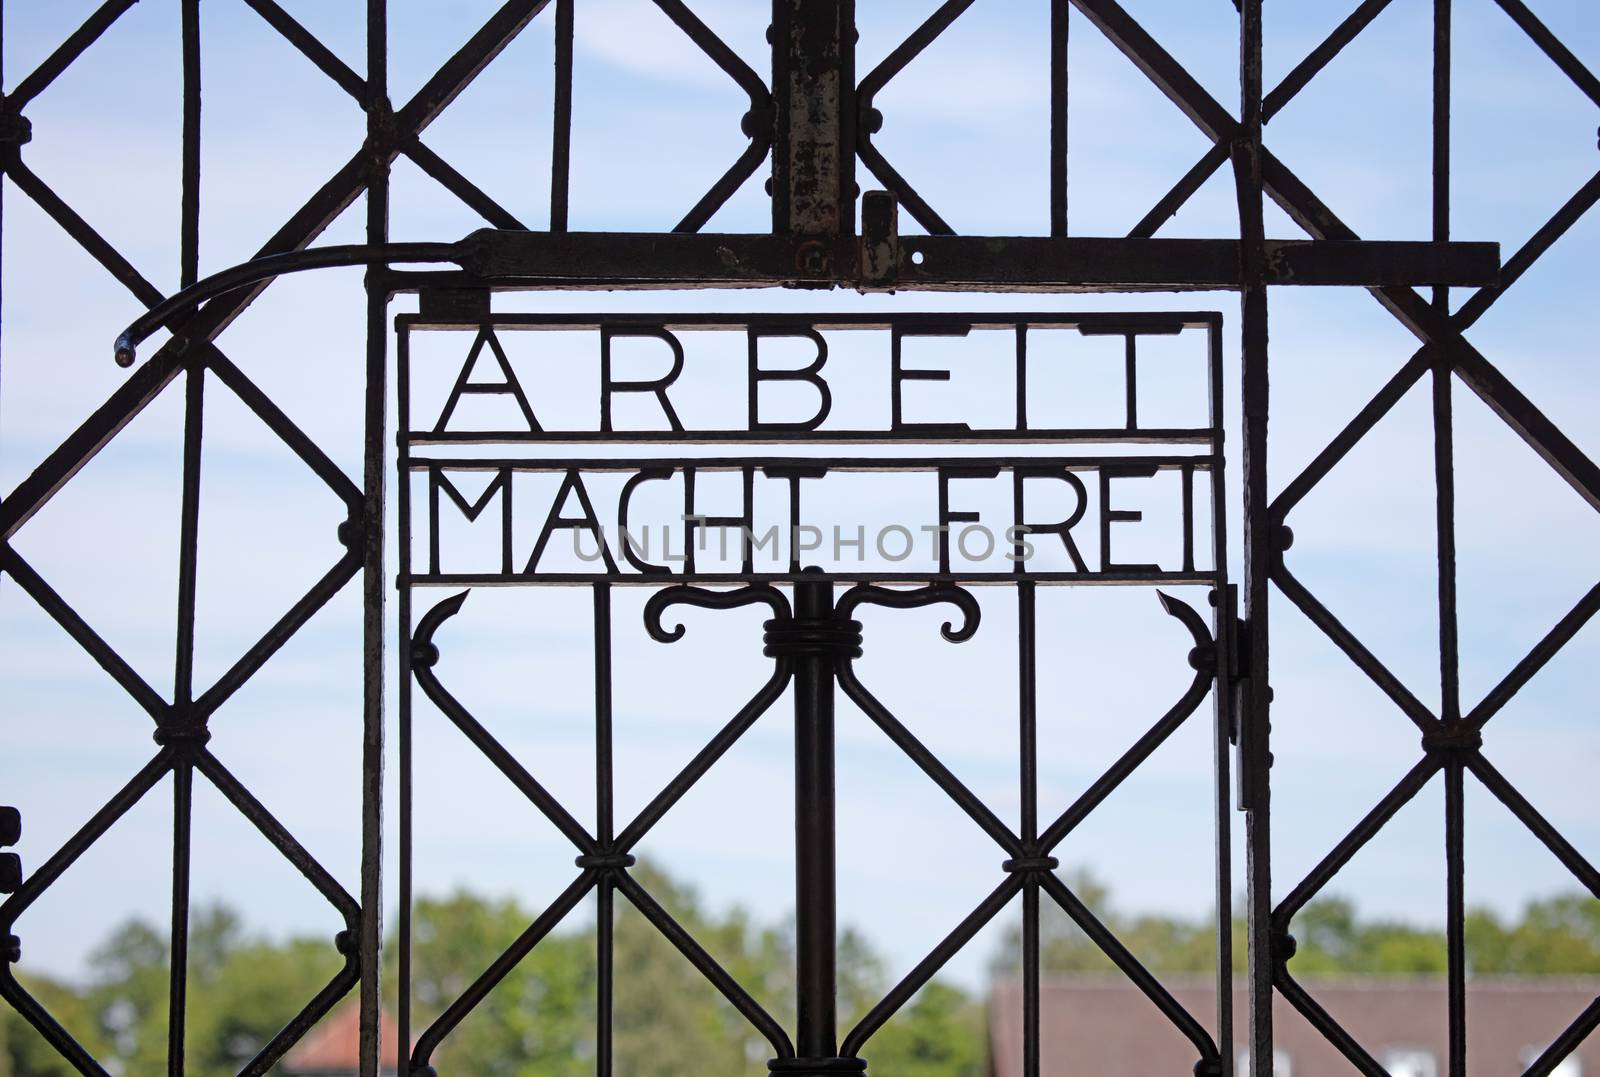 Dachau, Germany on july 13, 2020: Dachau concentration camp entrance gate, the entrance to the first Nazi concentration camp opened in Nazi Germany